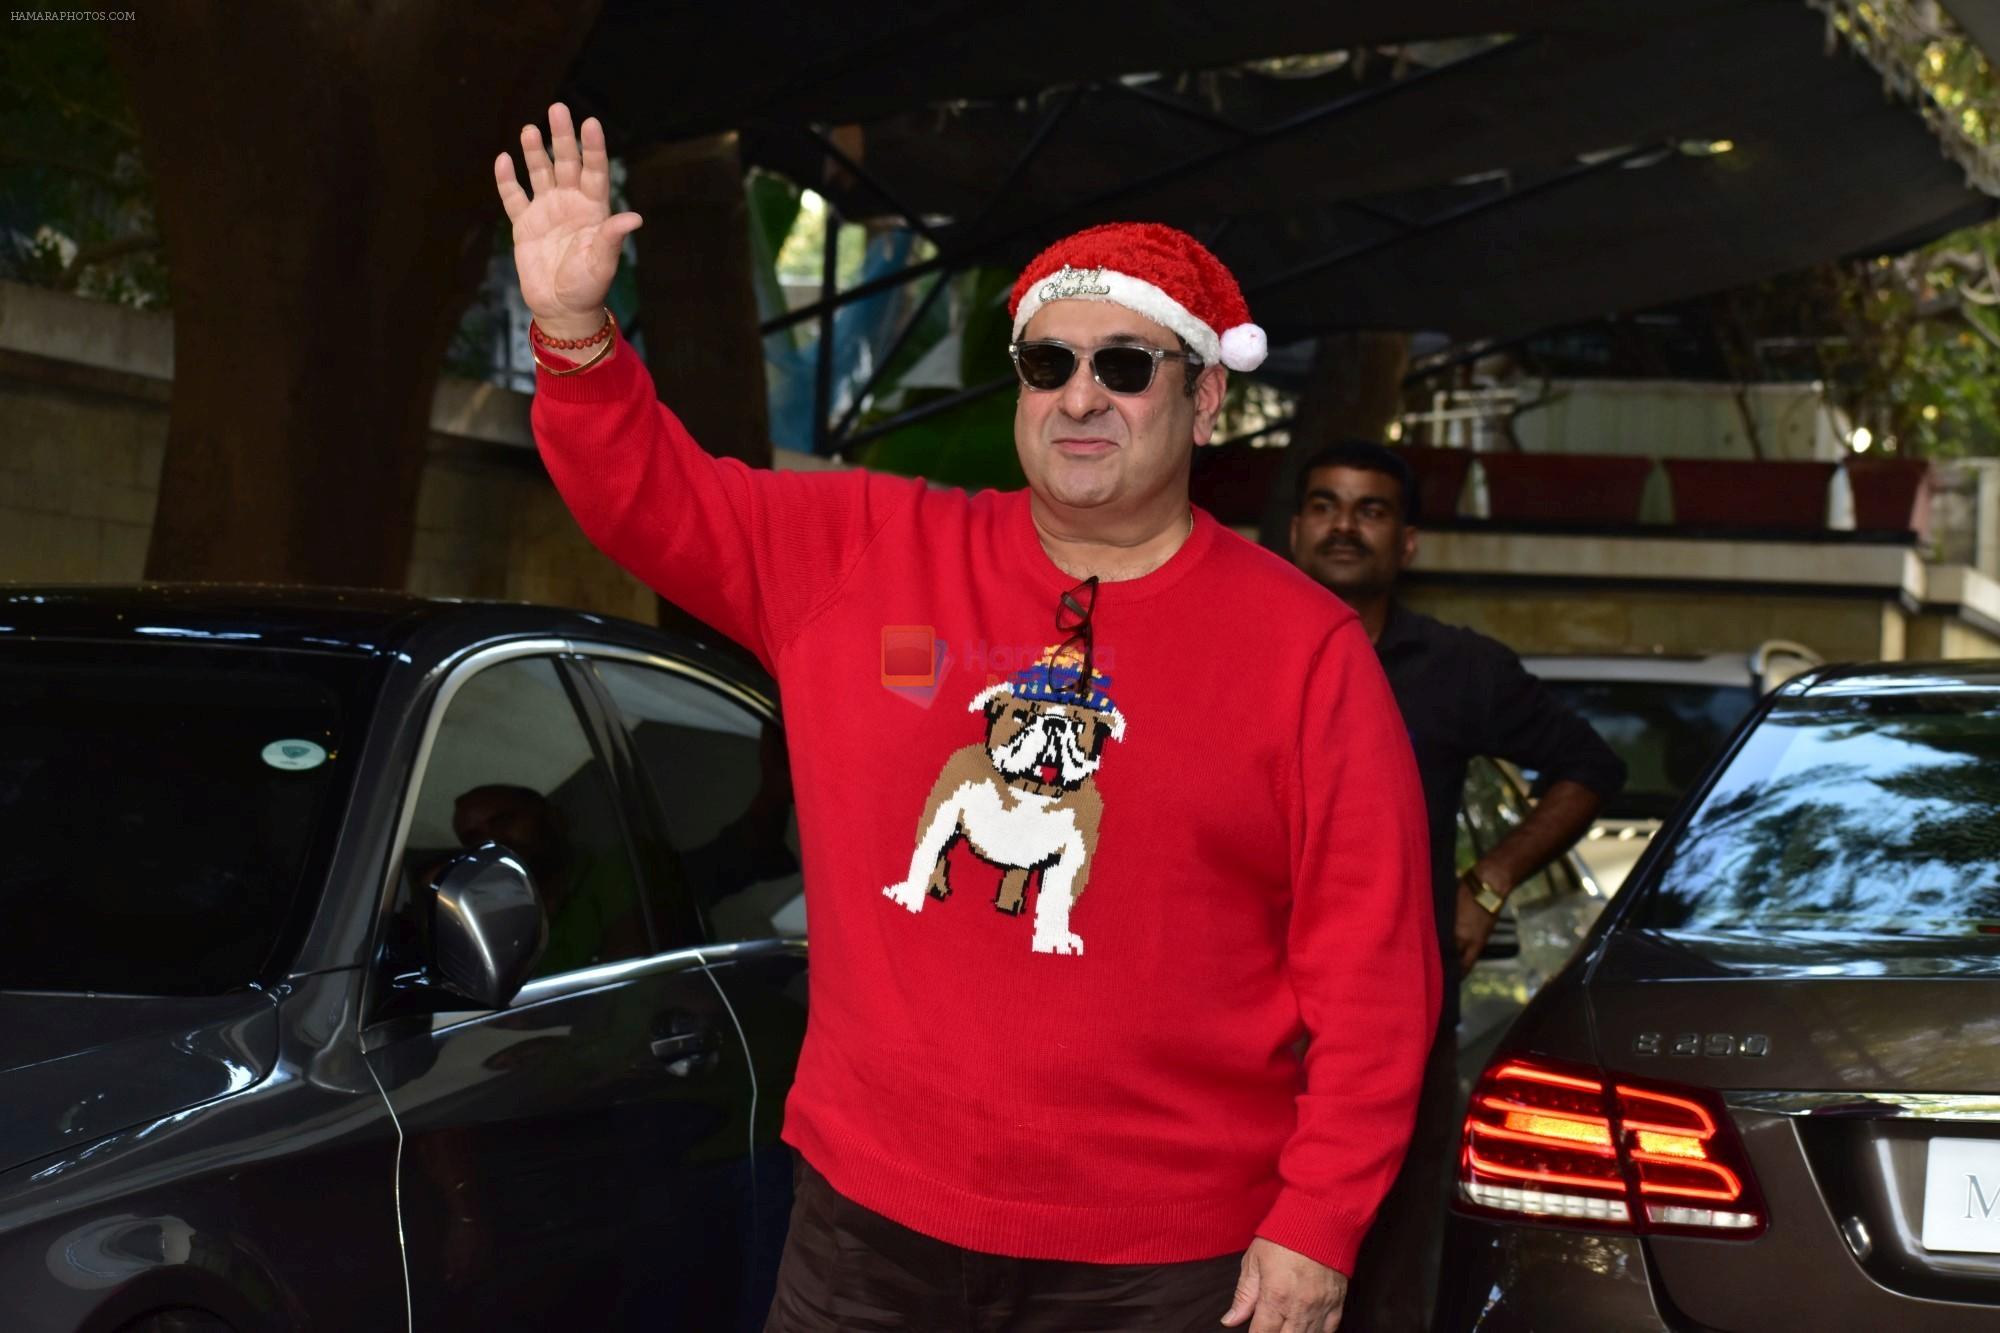 Rajiv Kapoor attends the christmas brunch at Shashi Kapoor's house in juhu on 25th Dec 2018